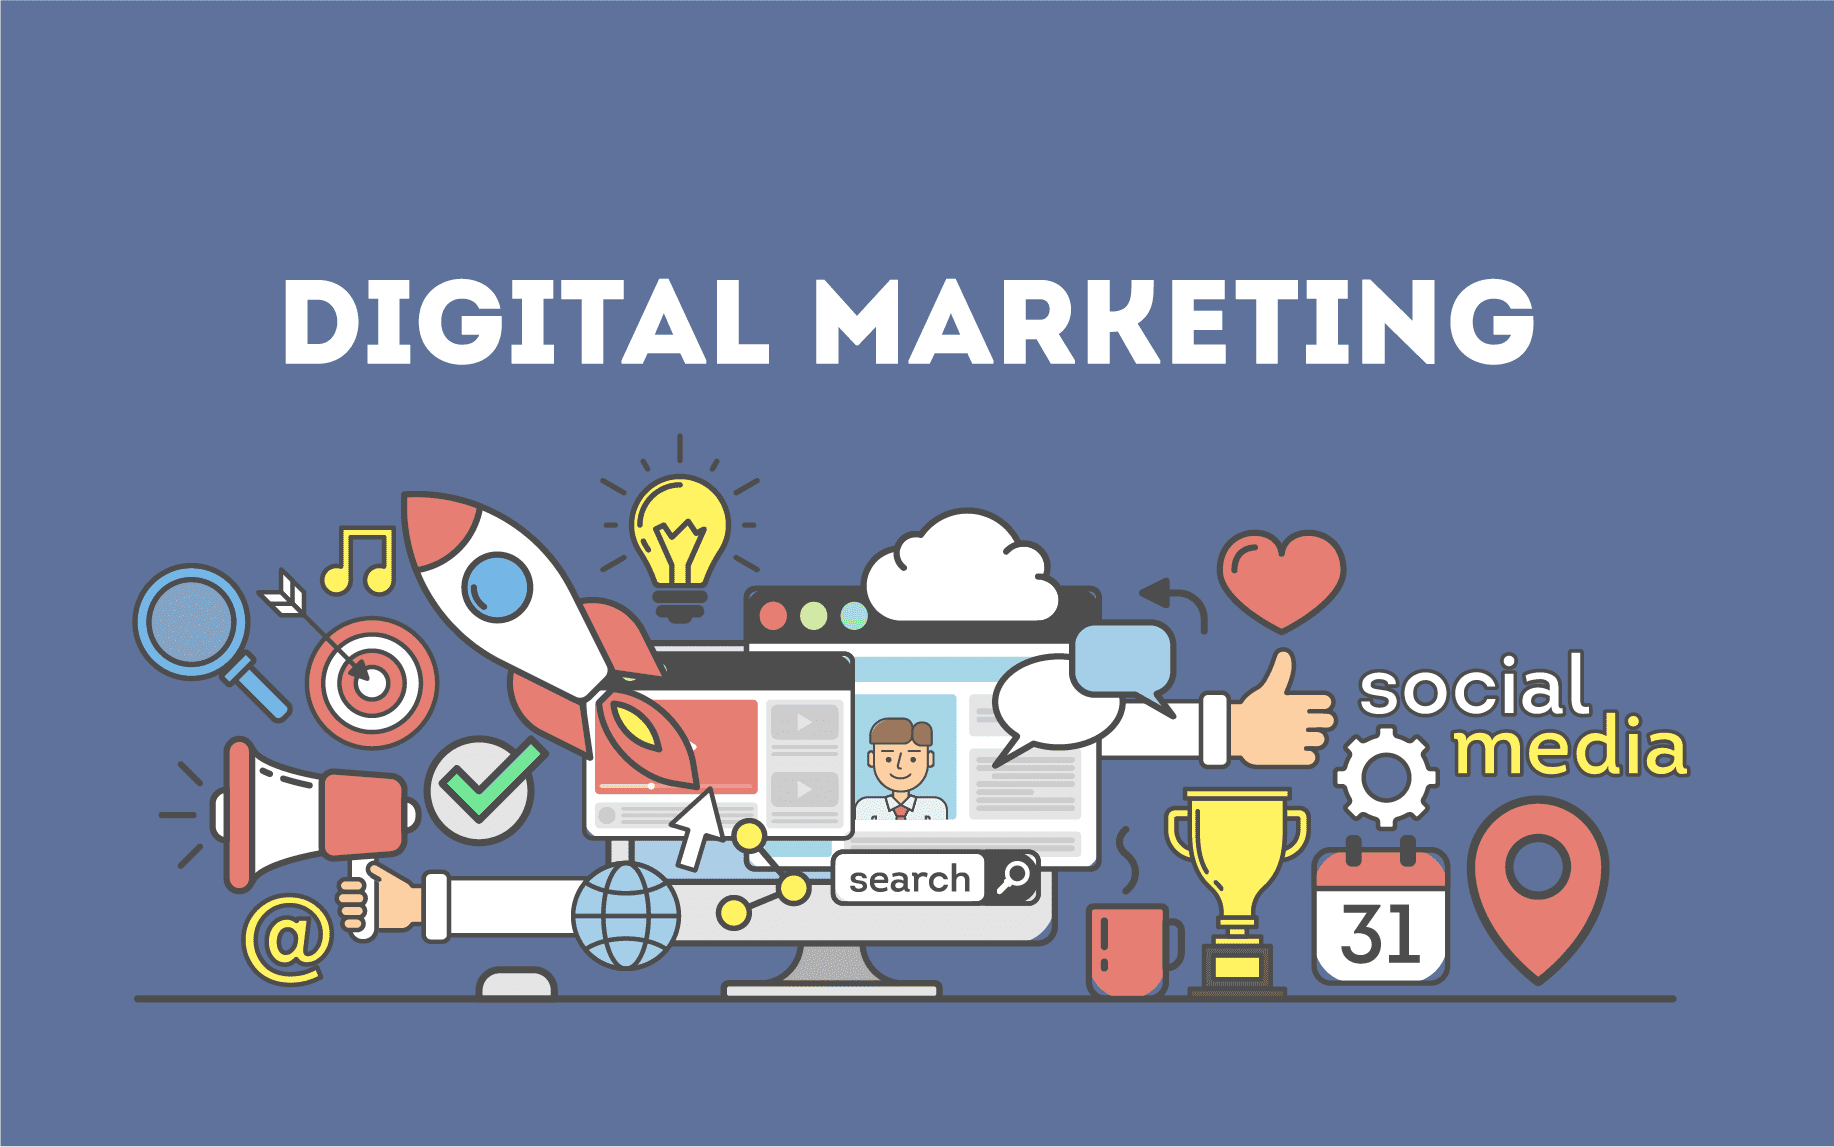 What are the Types of Digital Marketing?